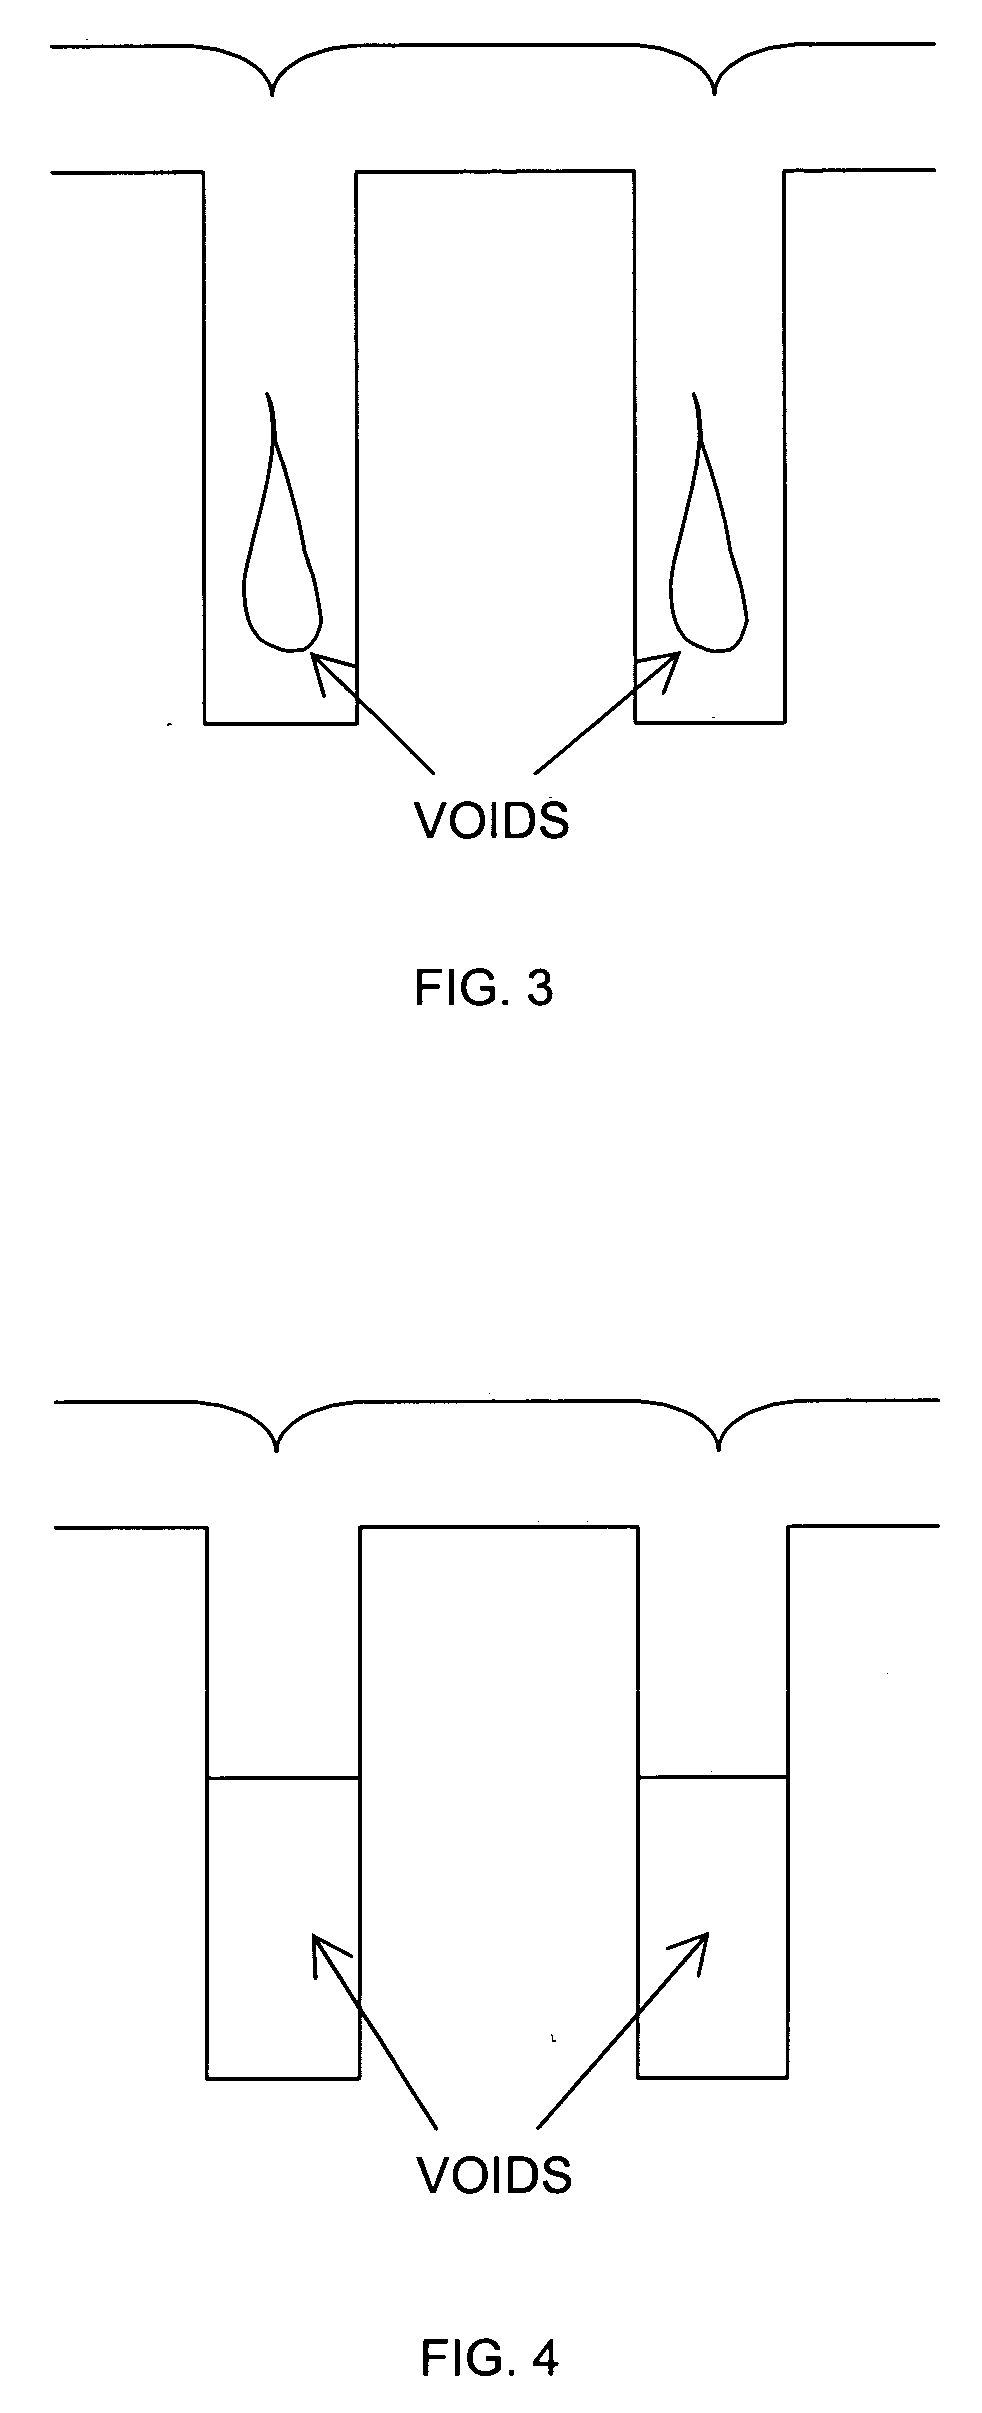 Micro-feature fill process and apparatus using hexachlorodisilane or other chlorine-containing silicon precursor